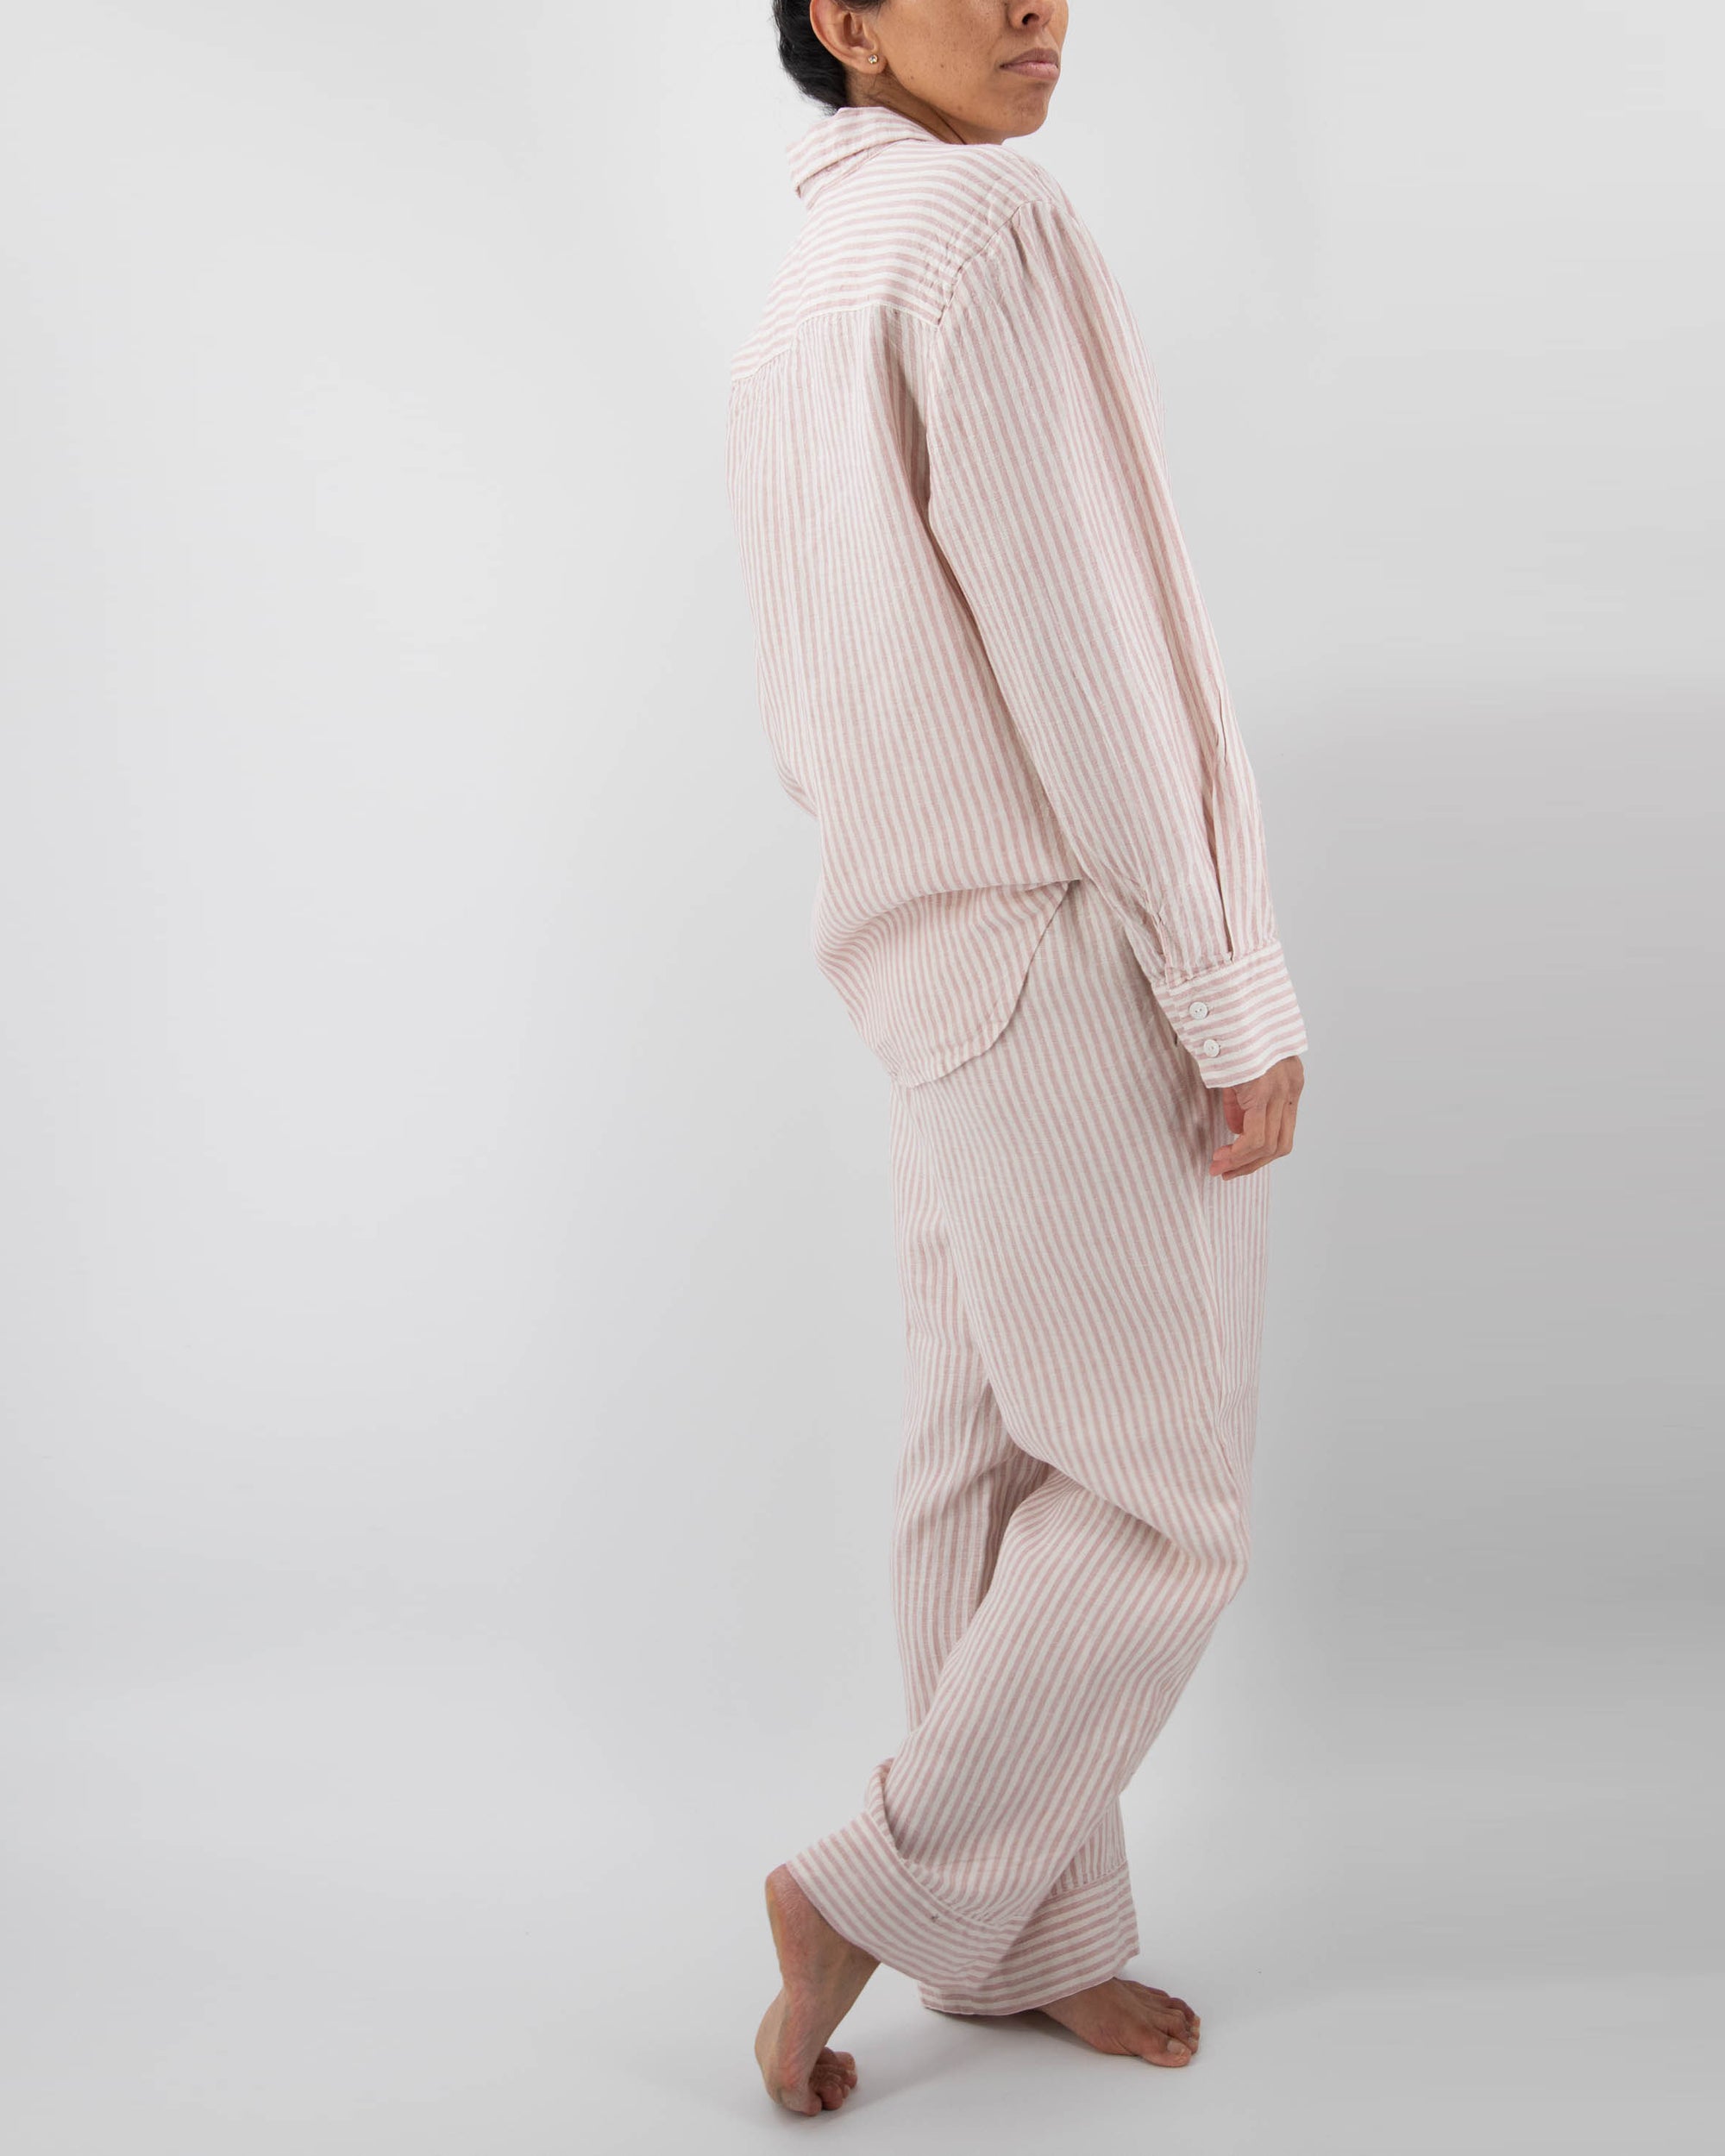 Model in pink linen striped pajamas (long sleeved shirt and long pants) 